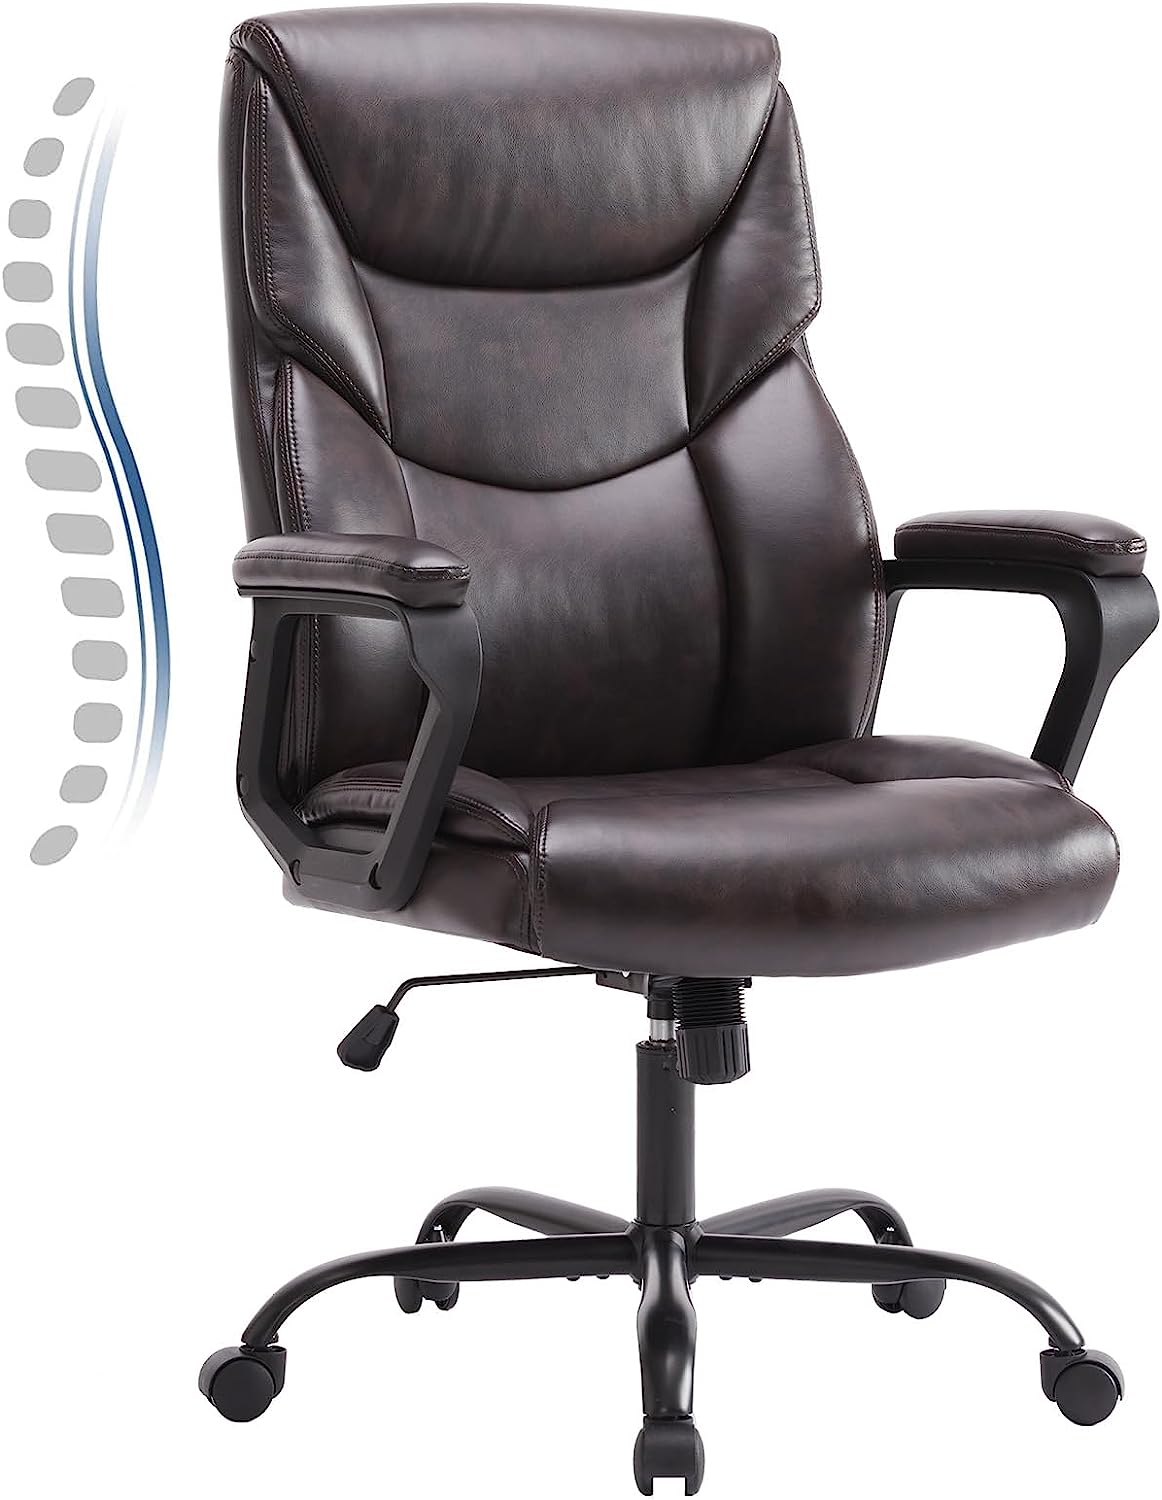 Office Chair with Ergonomic Padded Armrest, Lumbar Support, Strong Metal Base PU Leather, Brown